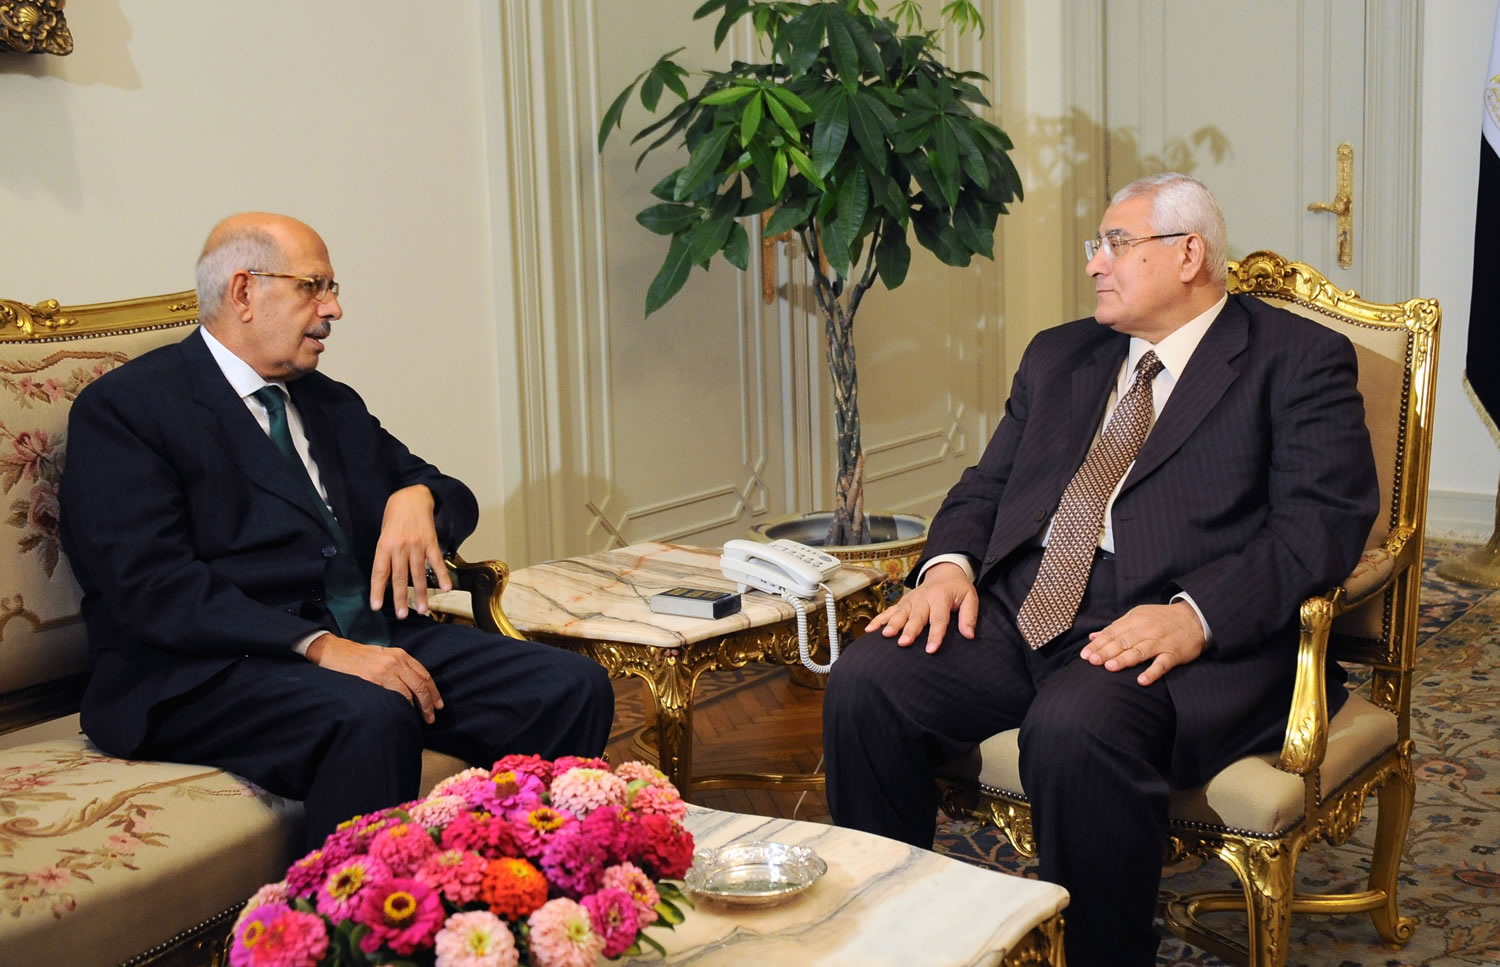 Newly-appointed interim Prime Minister Mohamed Elbaradei, left, meeting with interim president Adly Mansour, right, at the presidential palace.